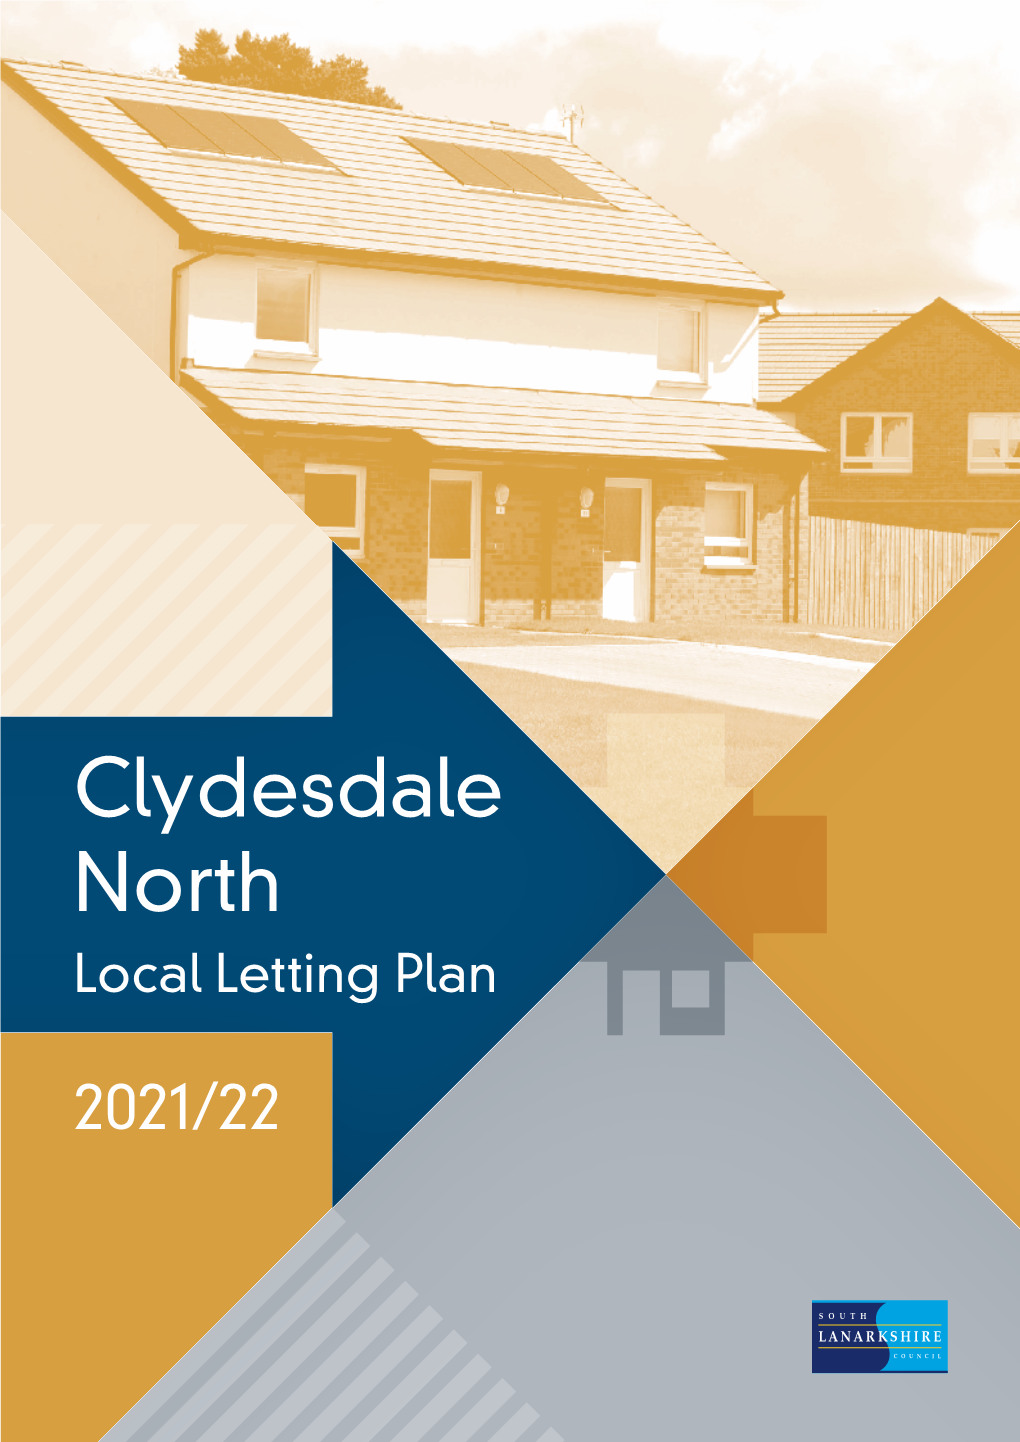 Clydesdale North Local Letting Plan 2021/22